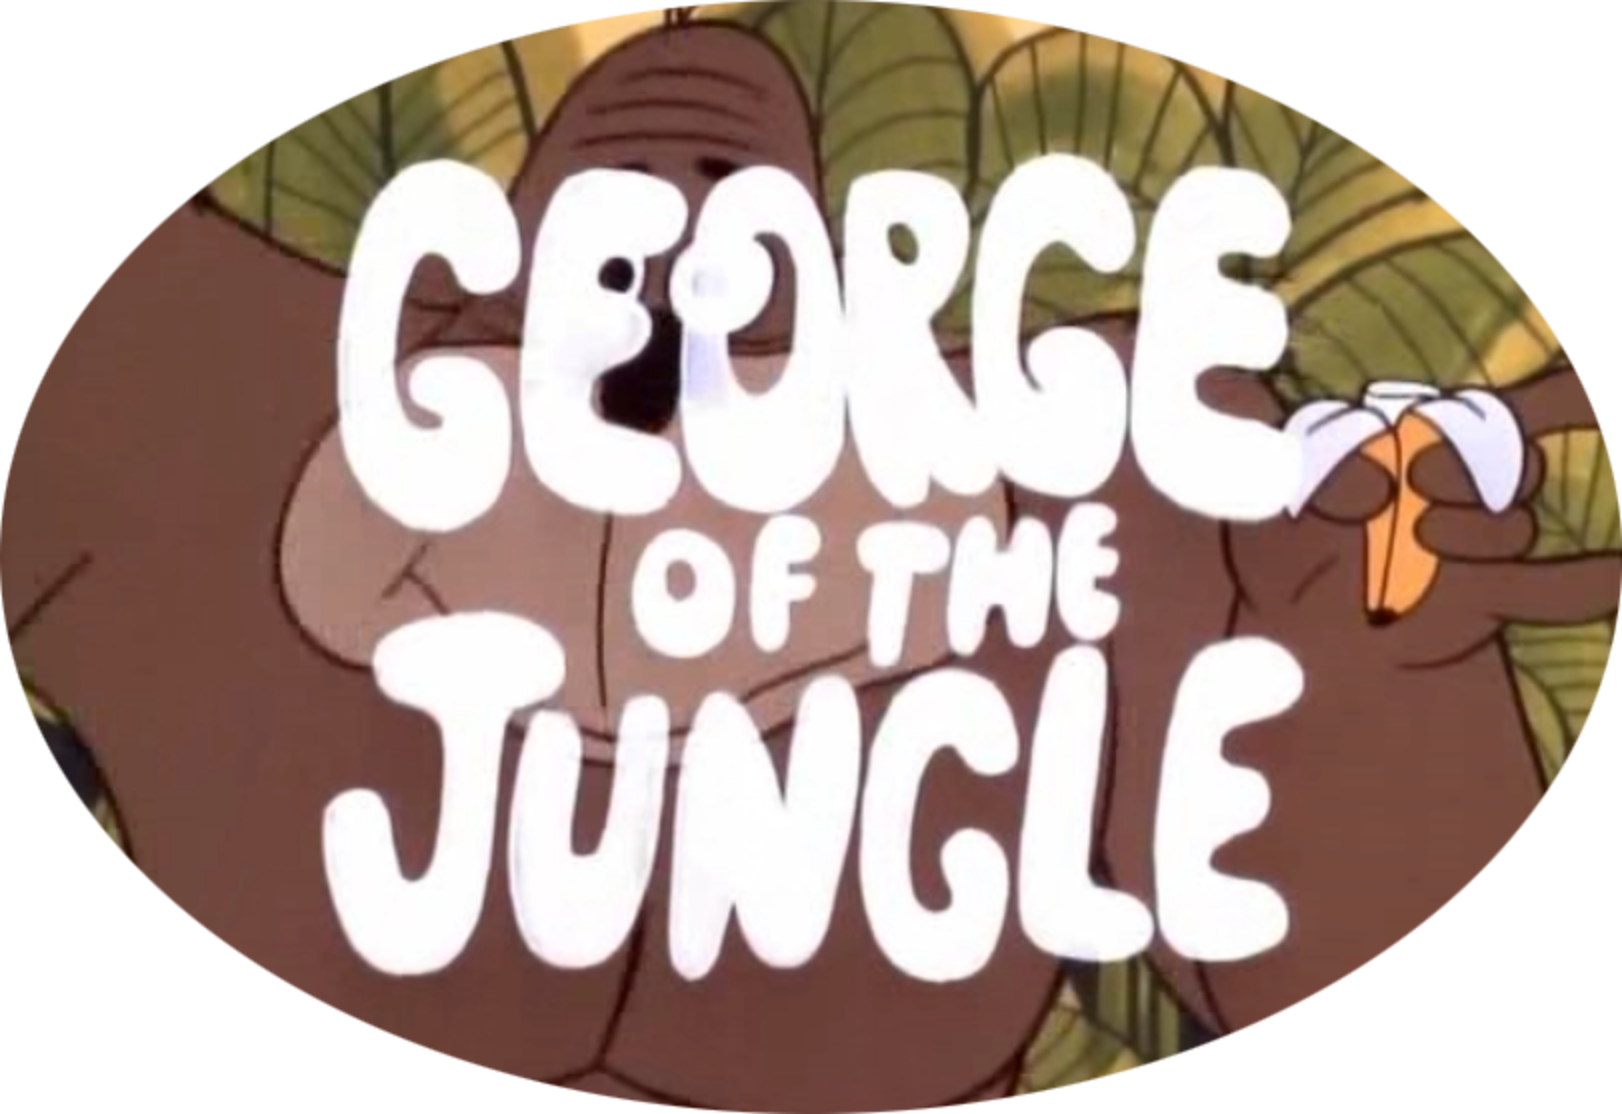 George of the Jungle (2 DVDs Box Set)